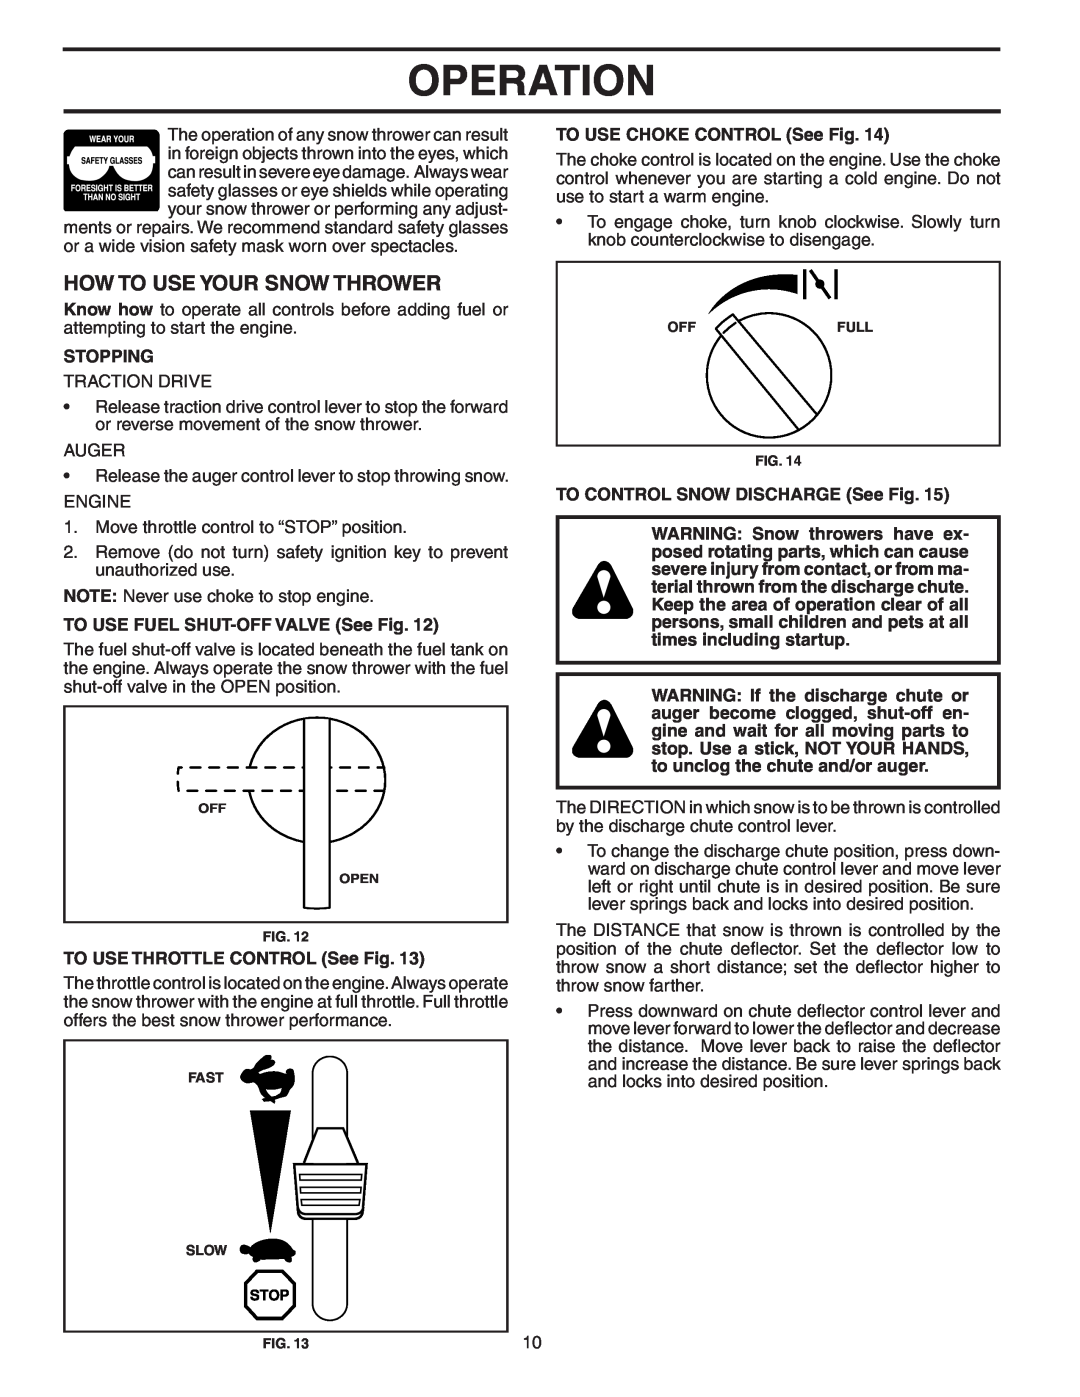 Poulan P8527ESA owner manual How To Use Your Snow Thrower, Operation, Stopping, TO USE FUEL SHUT-OFF VALVE See Fig 